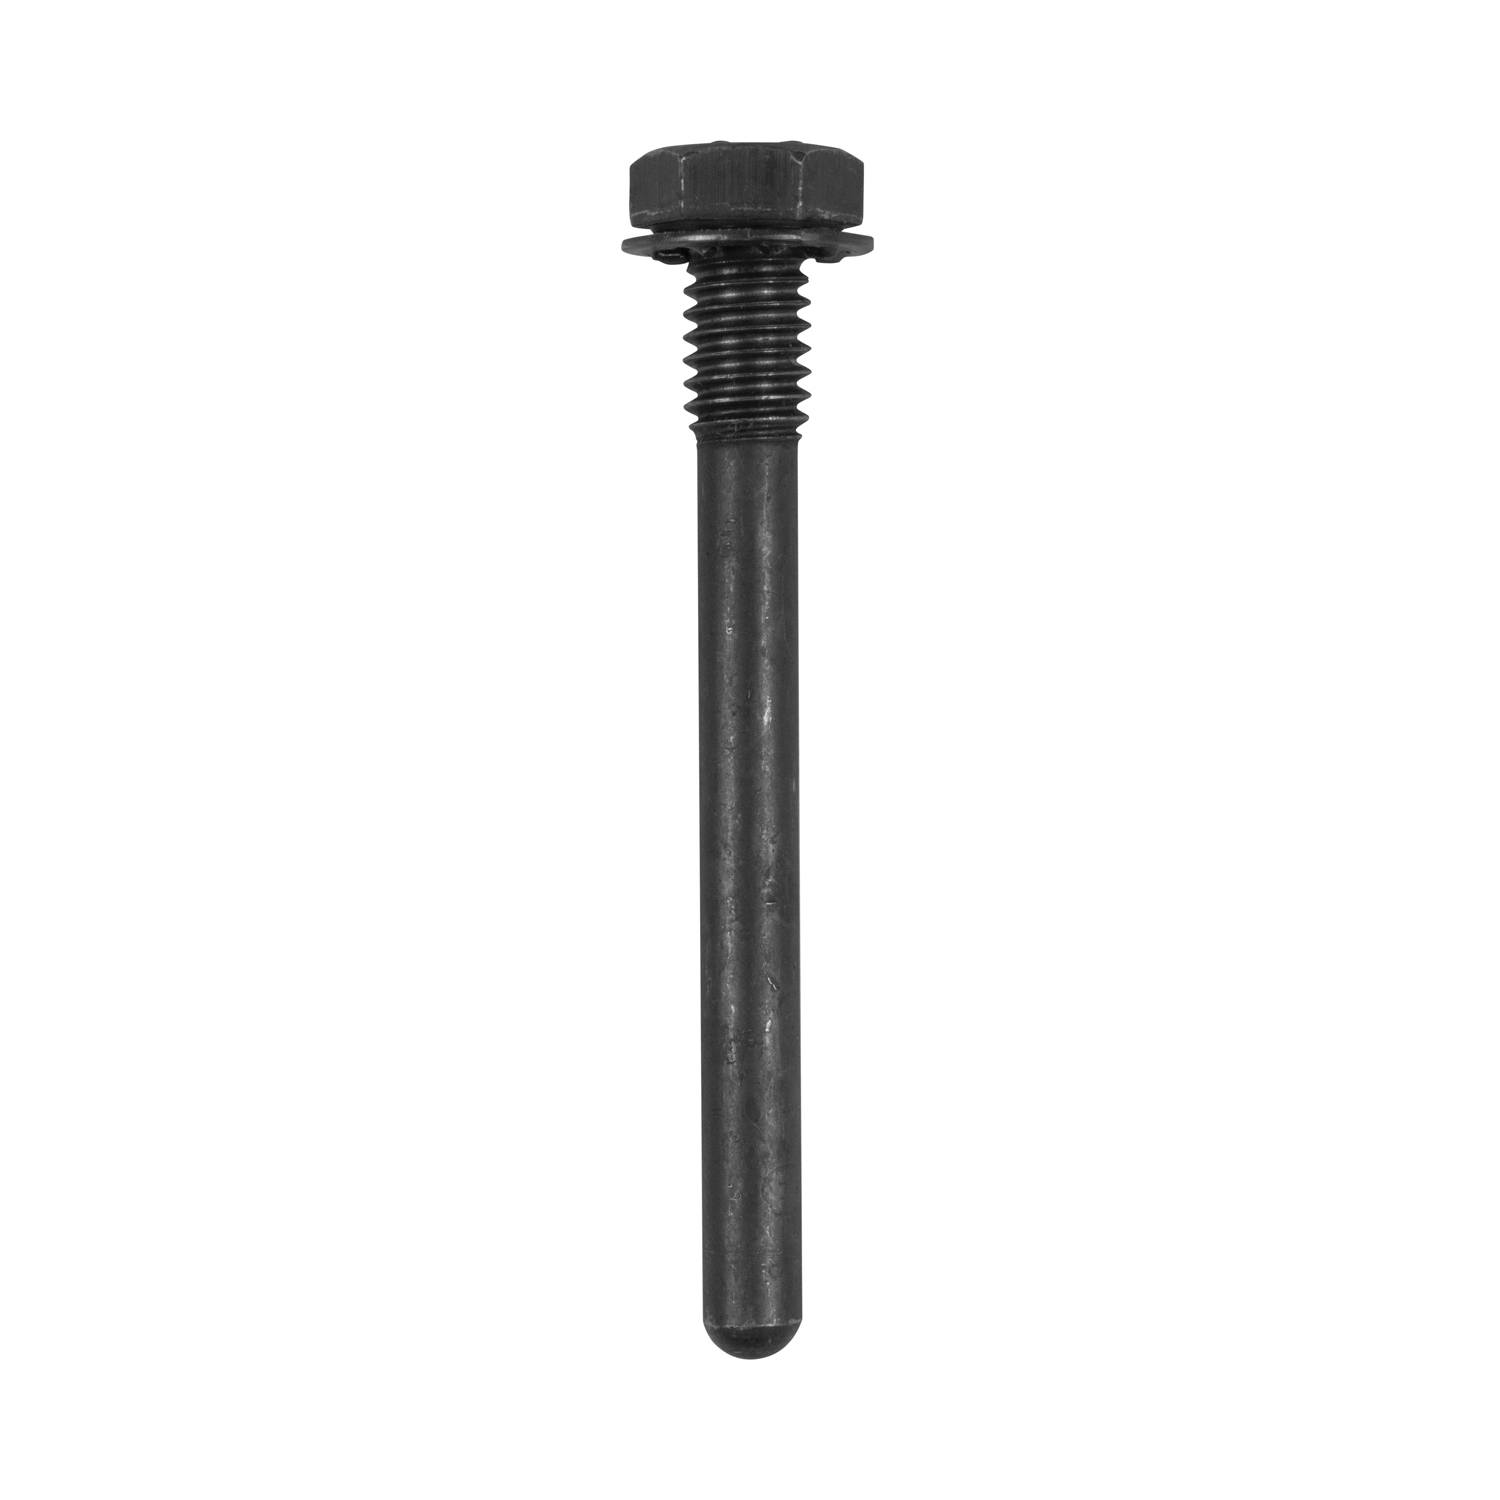 positraction cross pin bolt for GM 12 bolt car and truck. 